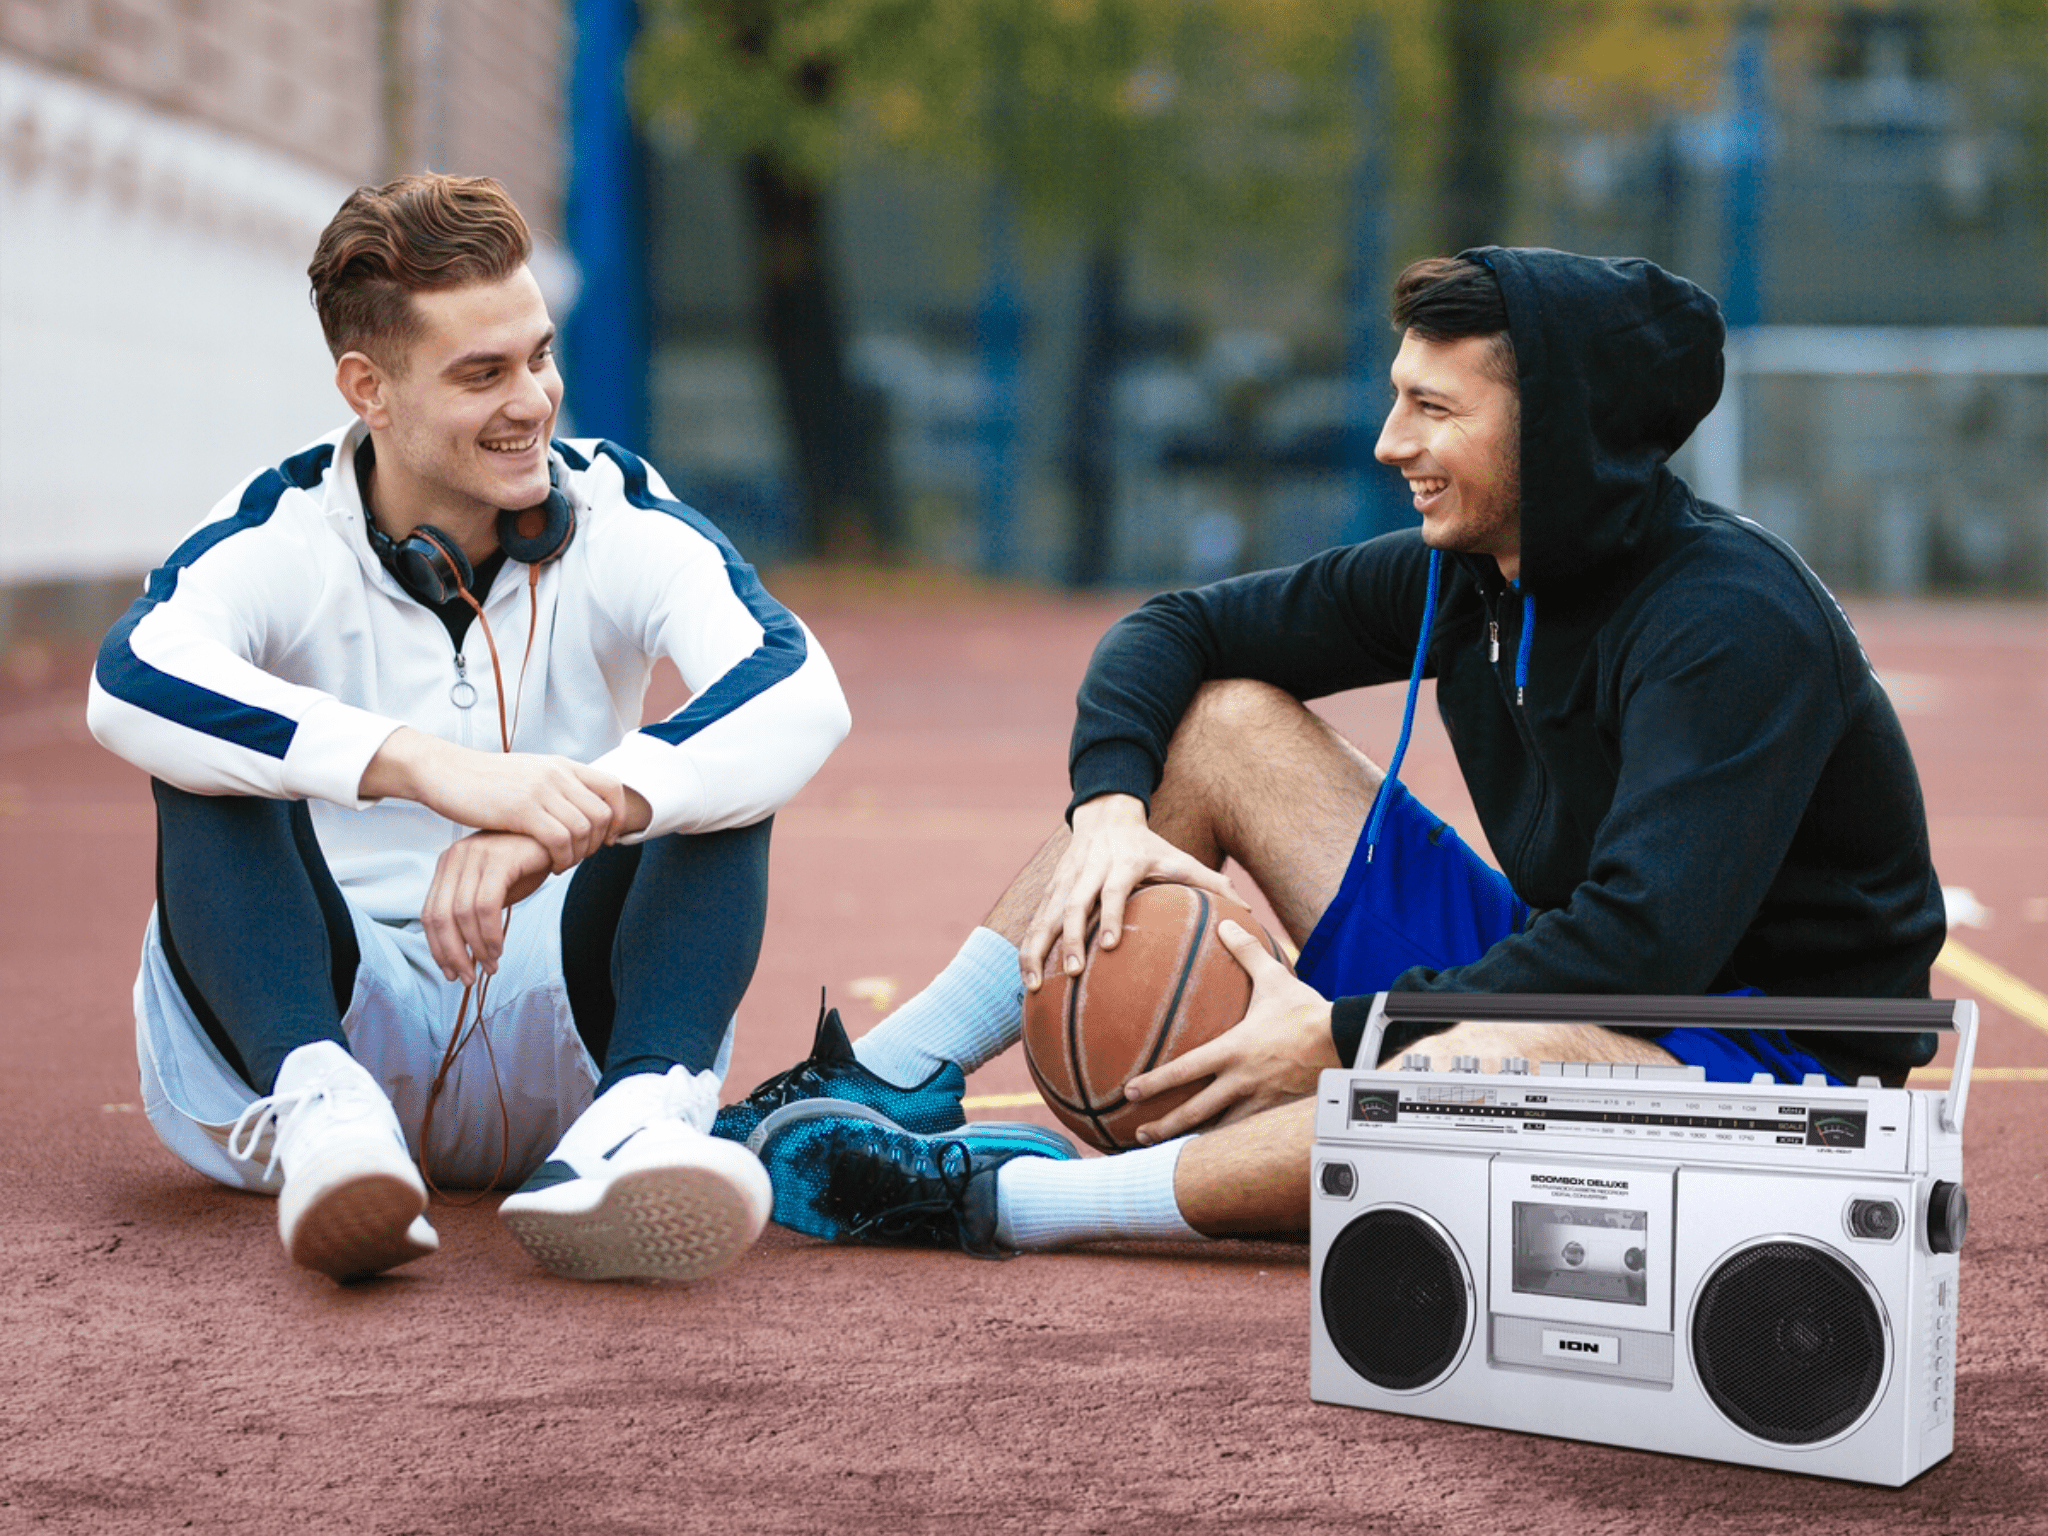 Listening to Music with ION Boombox